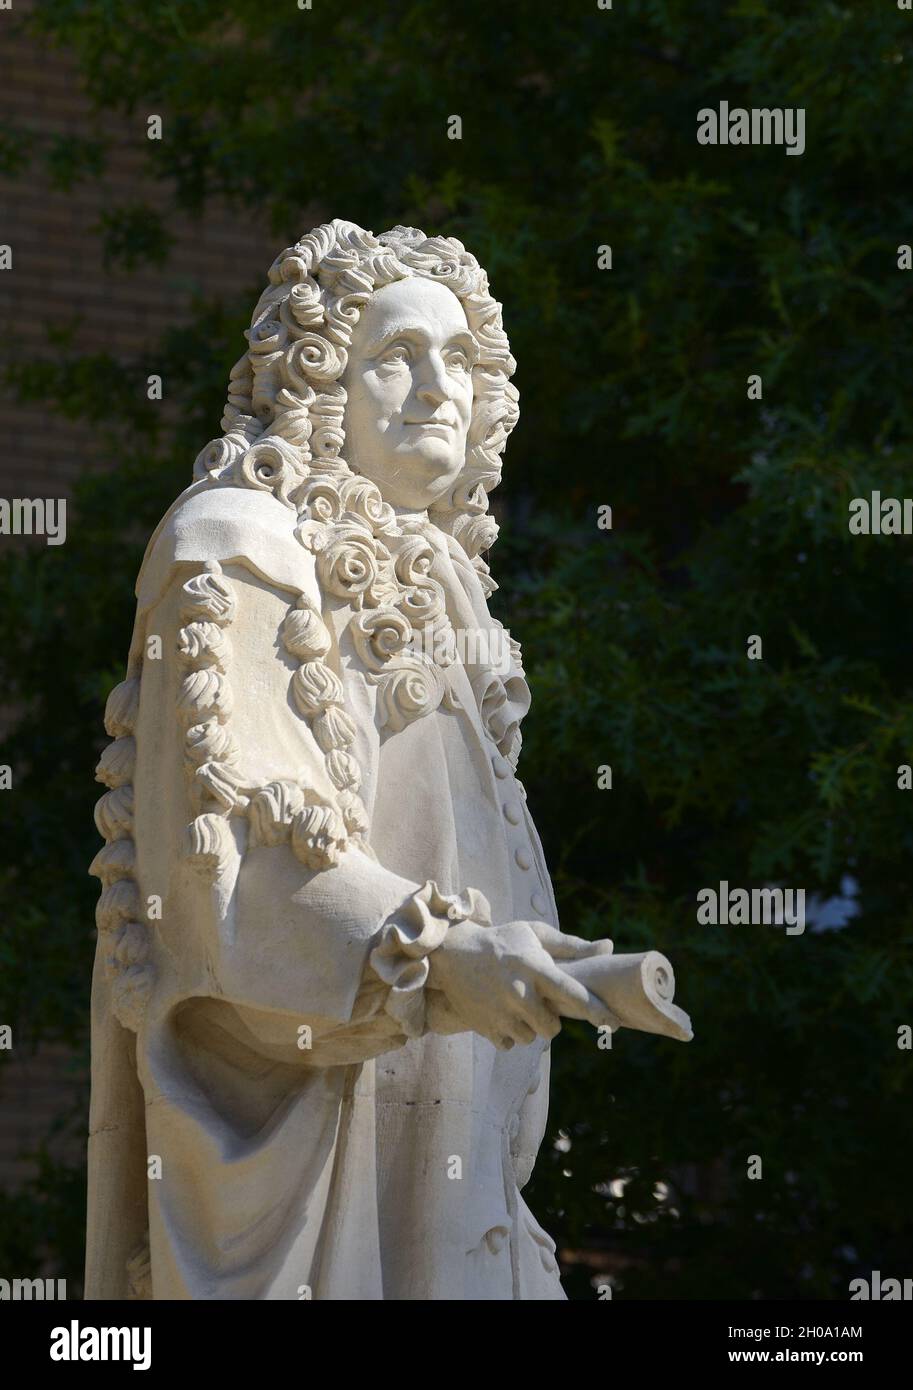 London, England, UK. Statue: Sir Hans Sloane (1660-1753: physician and naturalist) in Duke of York's Square, Chelsea. Stock Photo